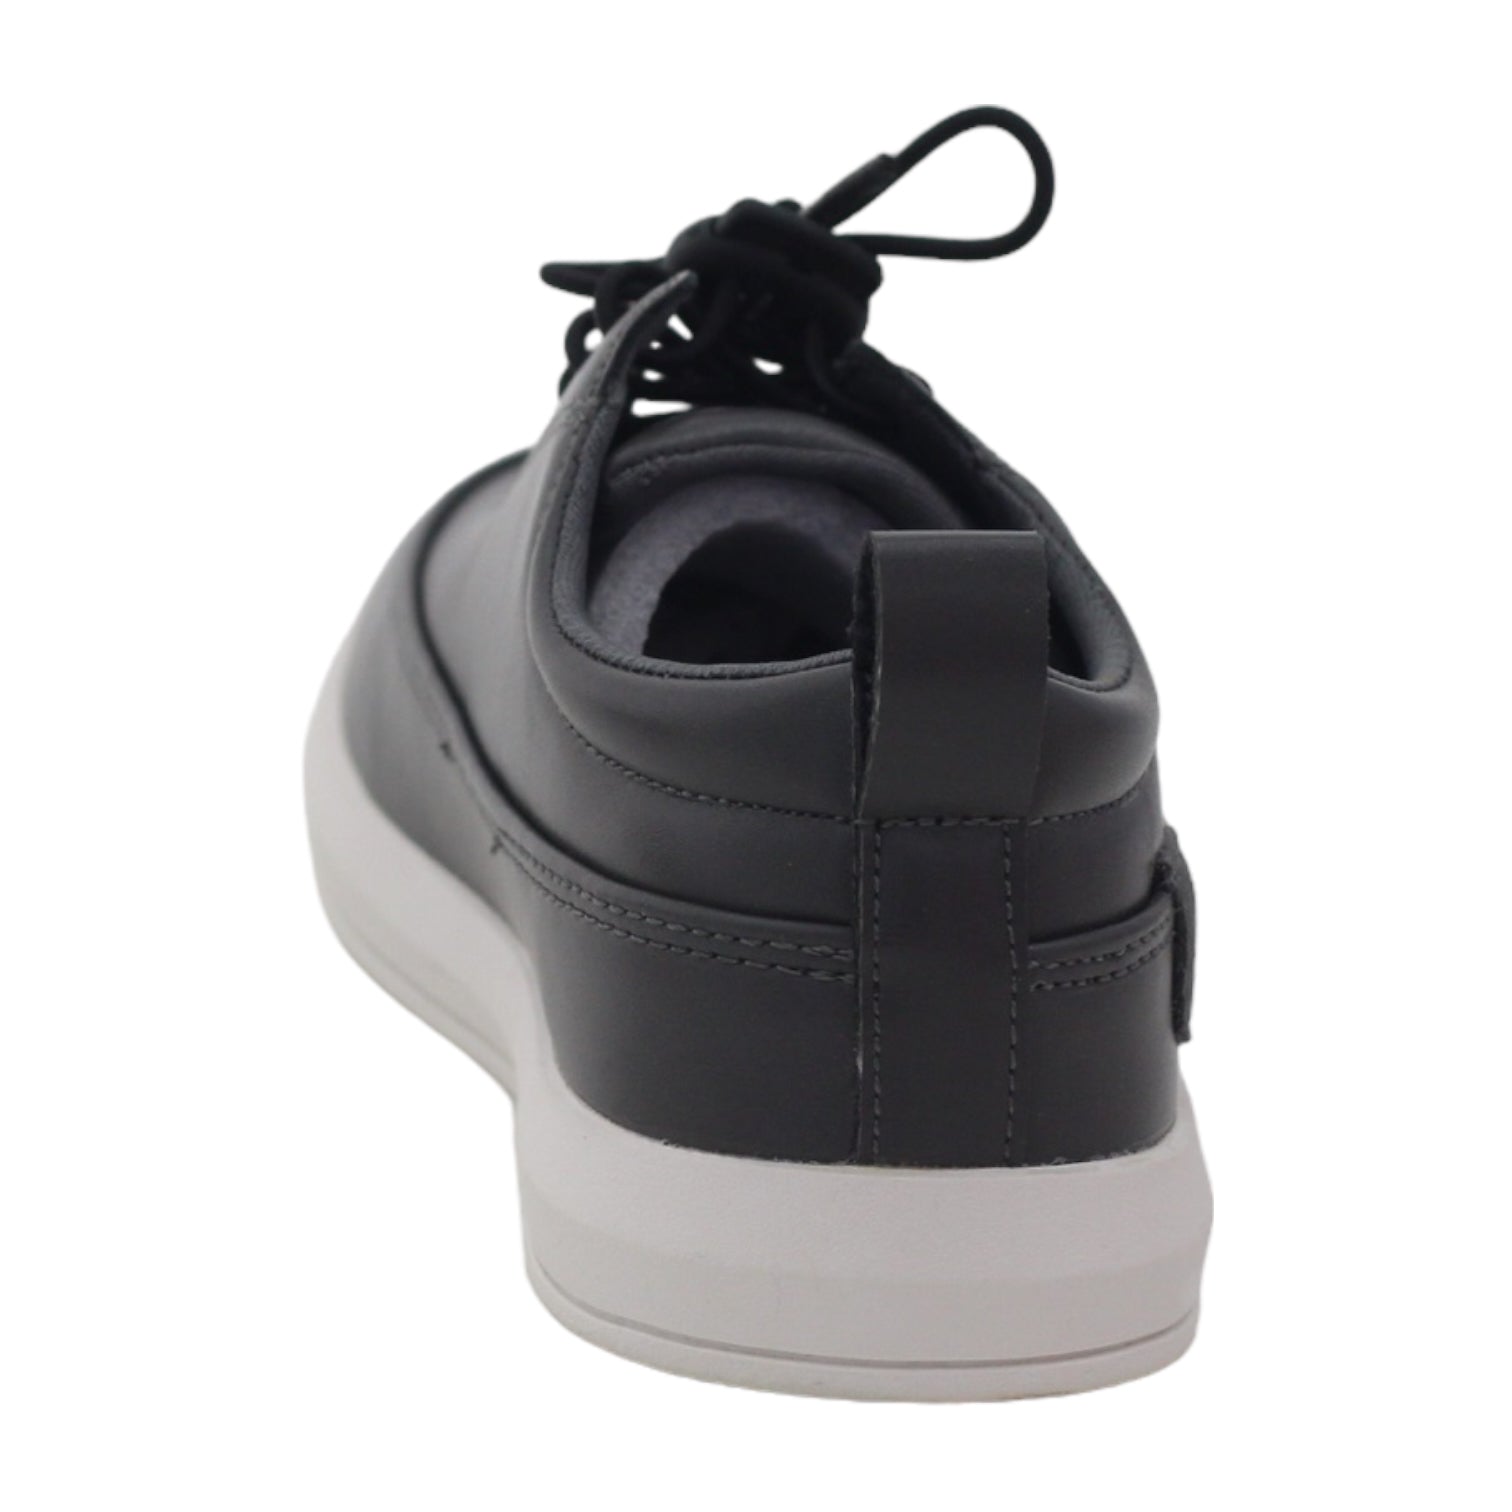 Grey boys lace up B-19 sneaker oliver